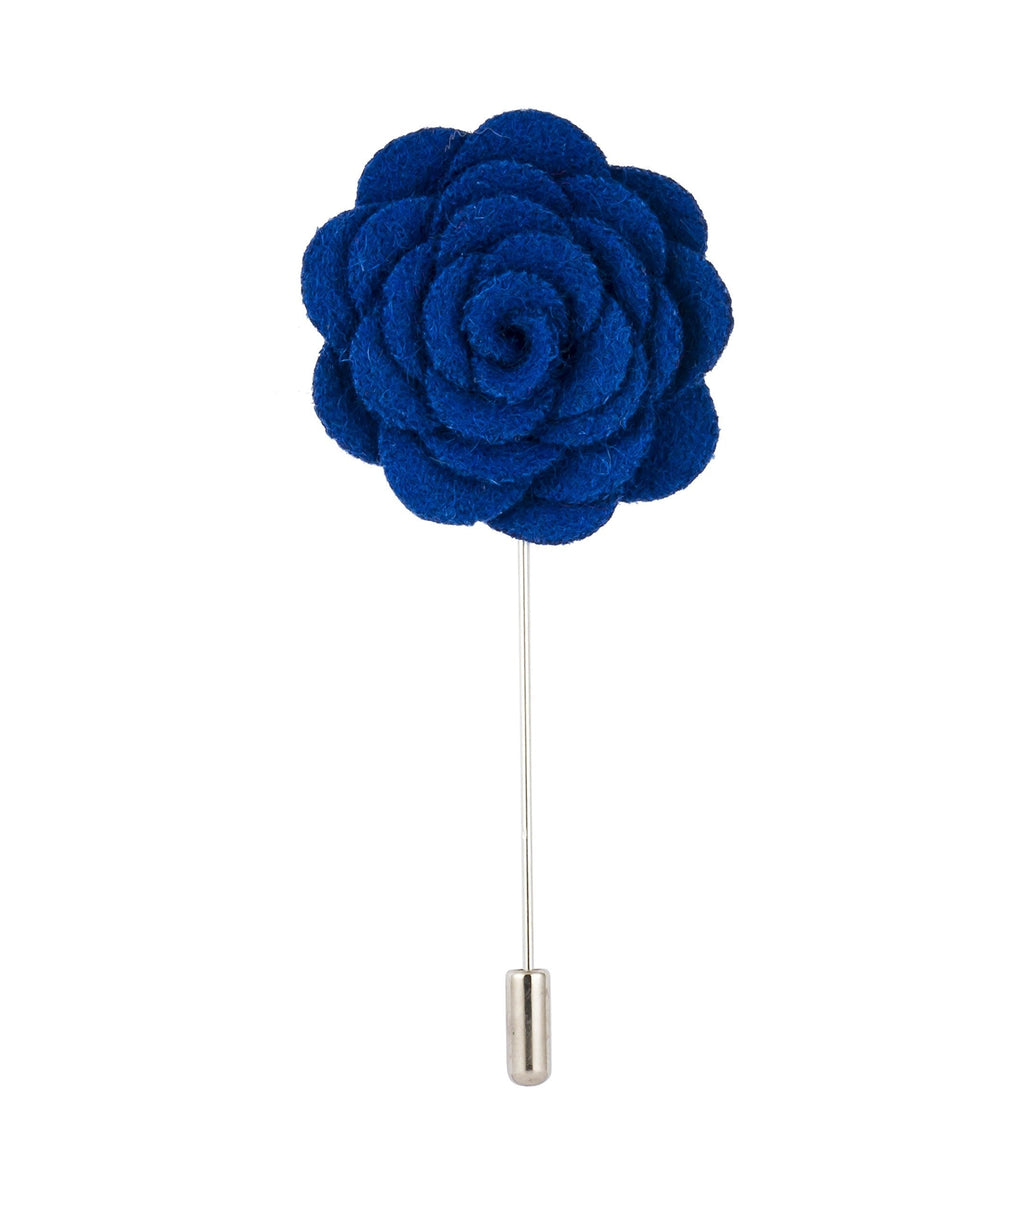 [Australia] - Knighthood Royal Blue Flower Lapel Pin Badge Coat Suit Collar Accessories Brooch for Men 